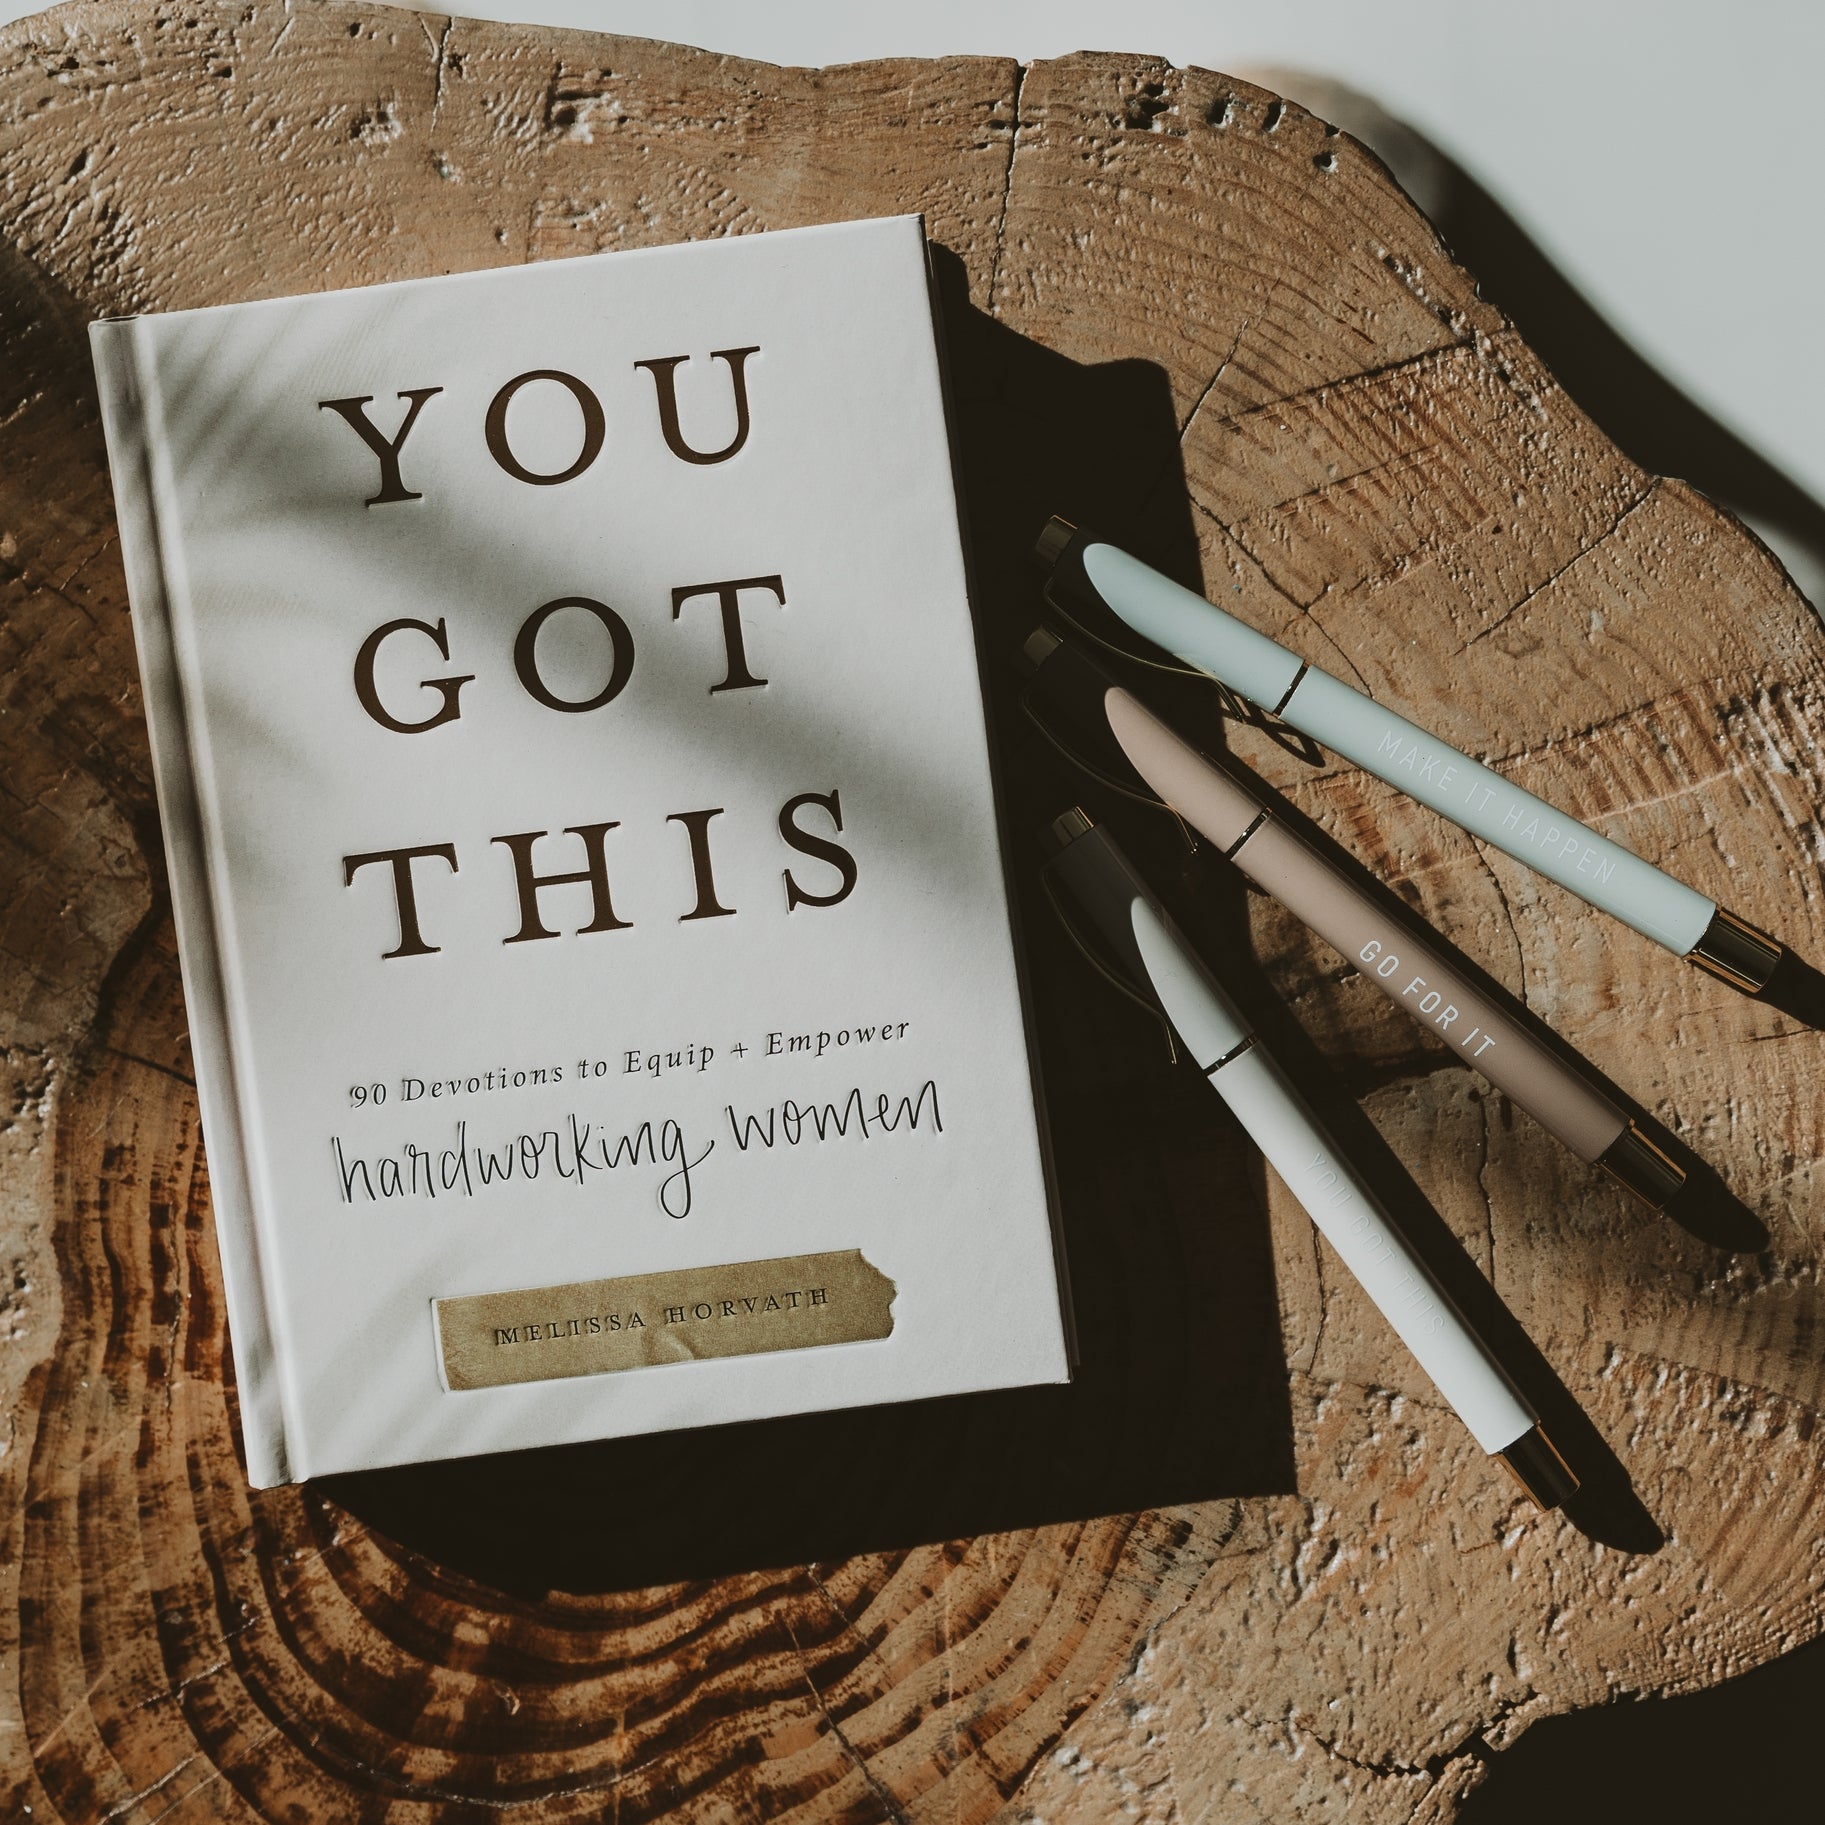 YOU GOT THIS | 90 Devotions to Empower Hardworking Women |